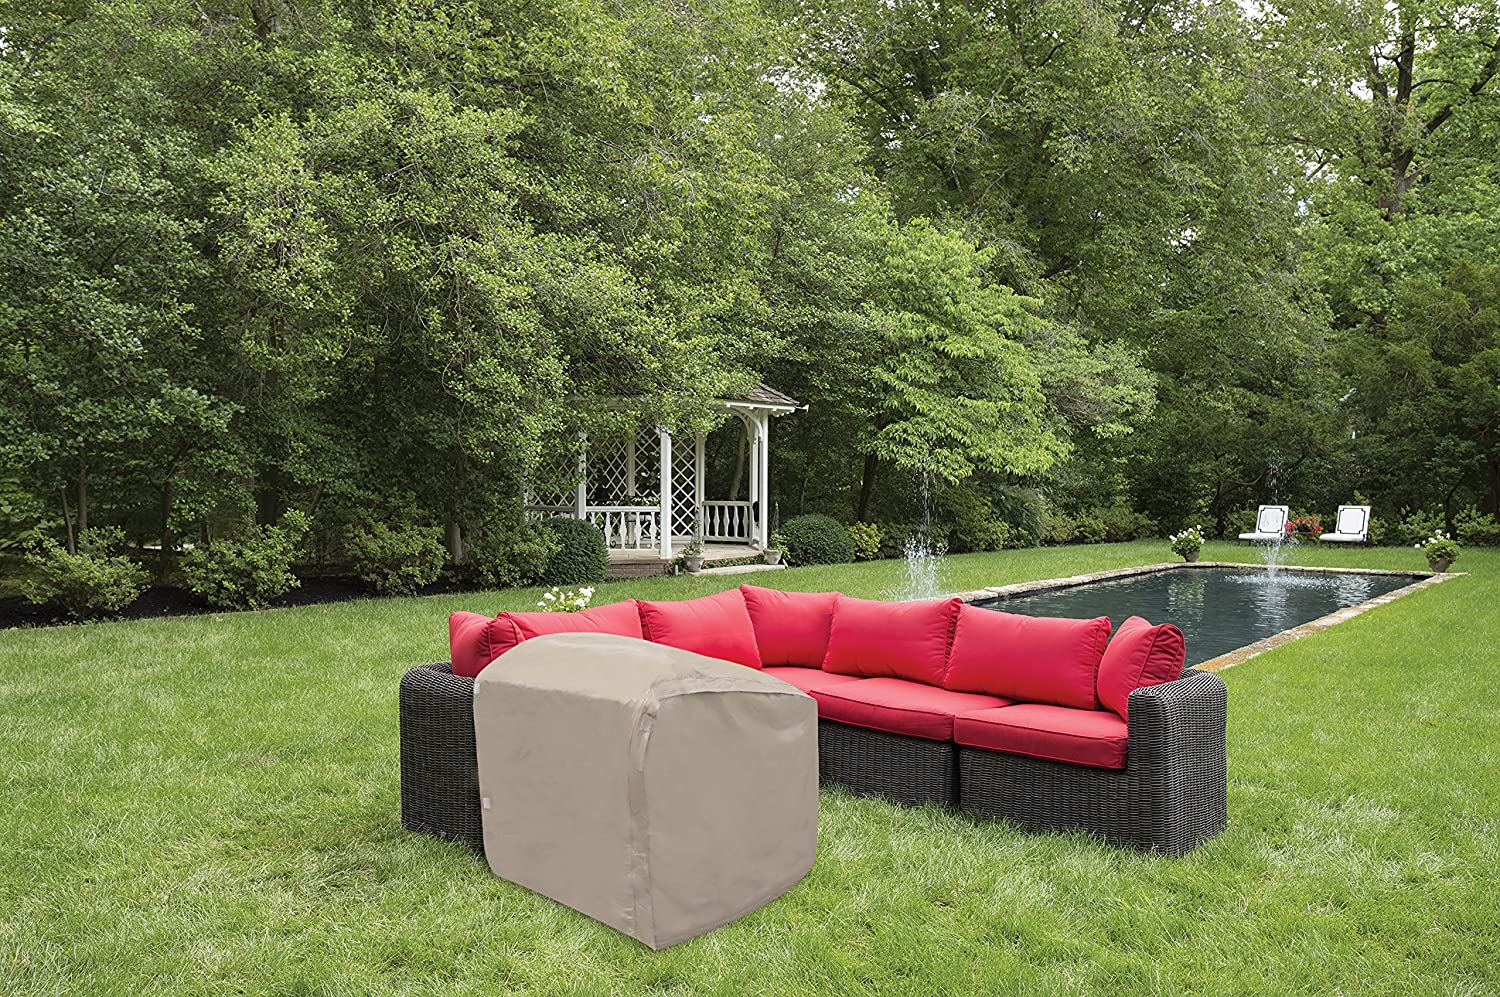  protect garden furniture cover